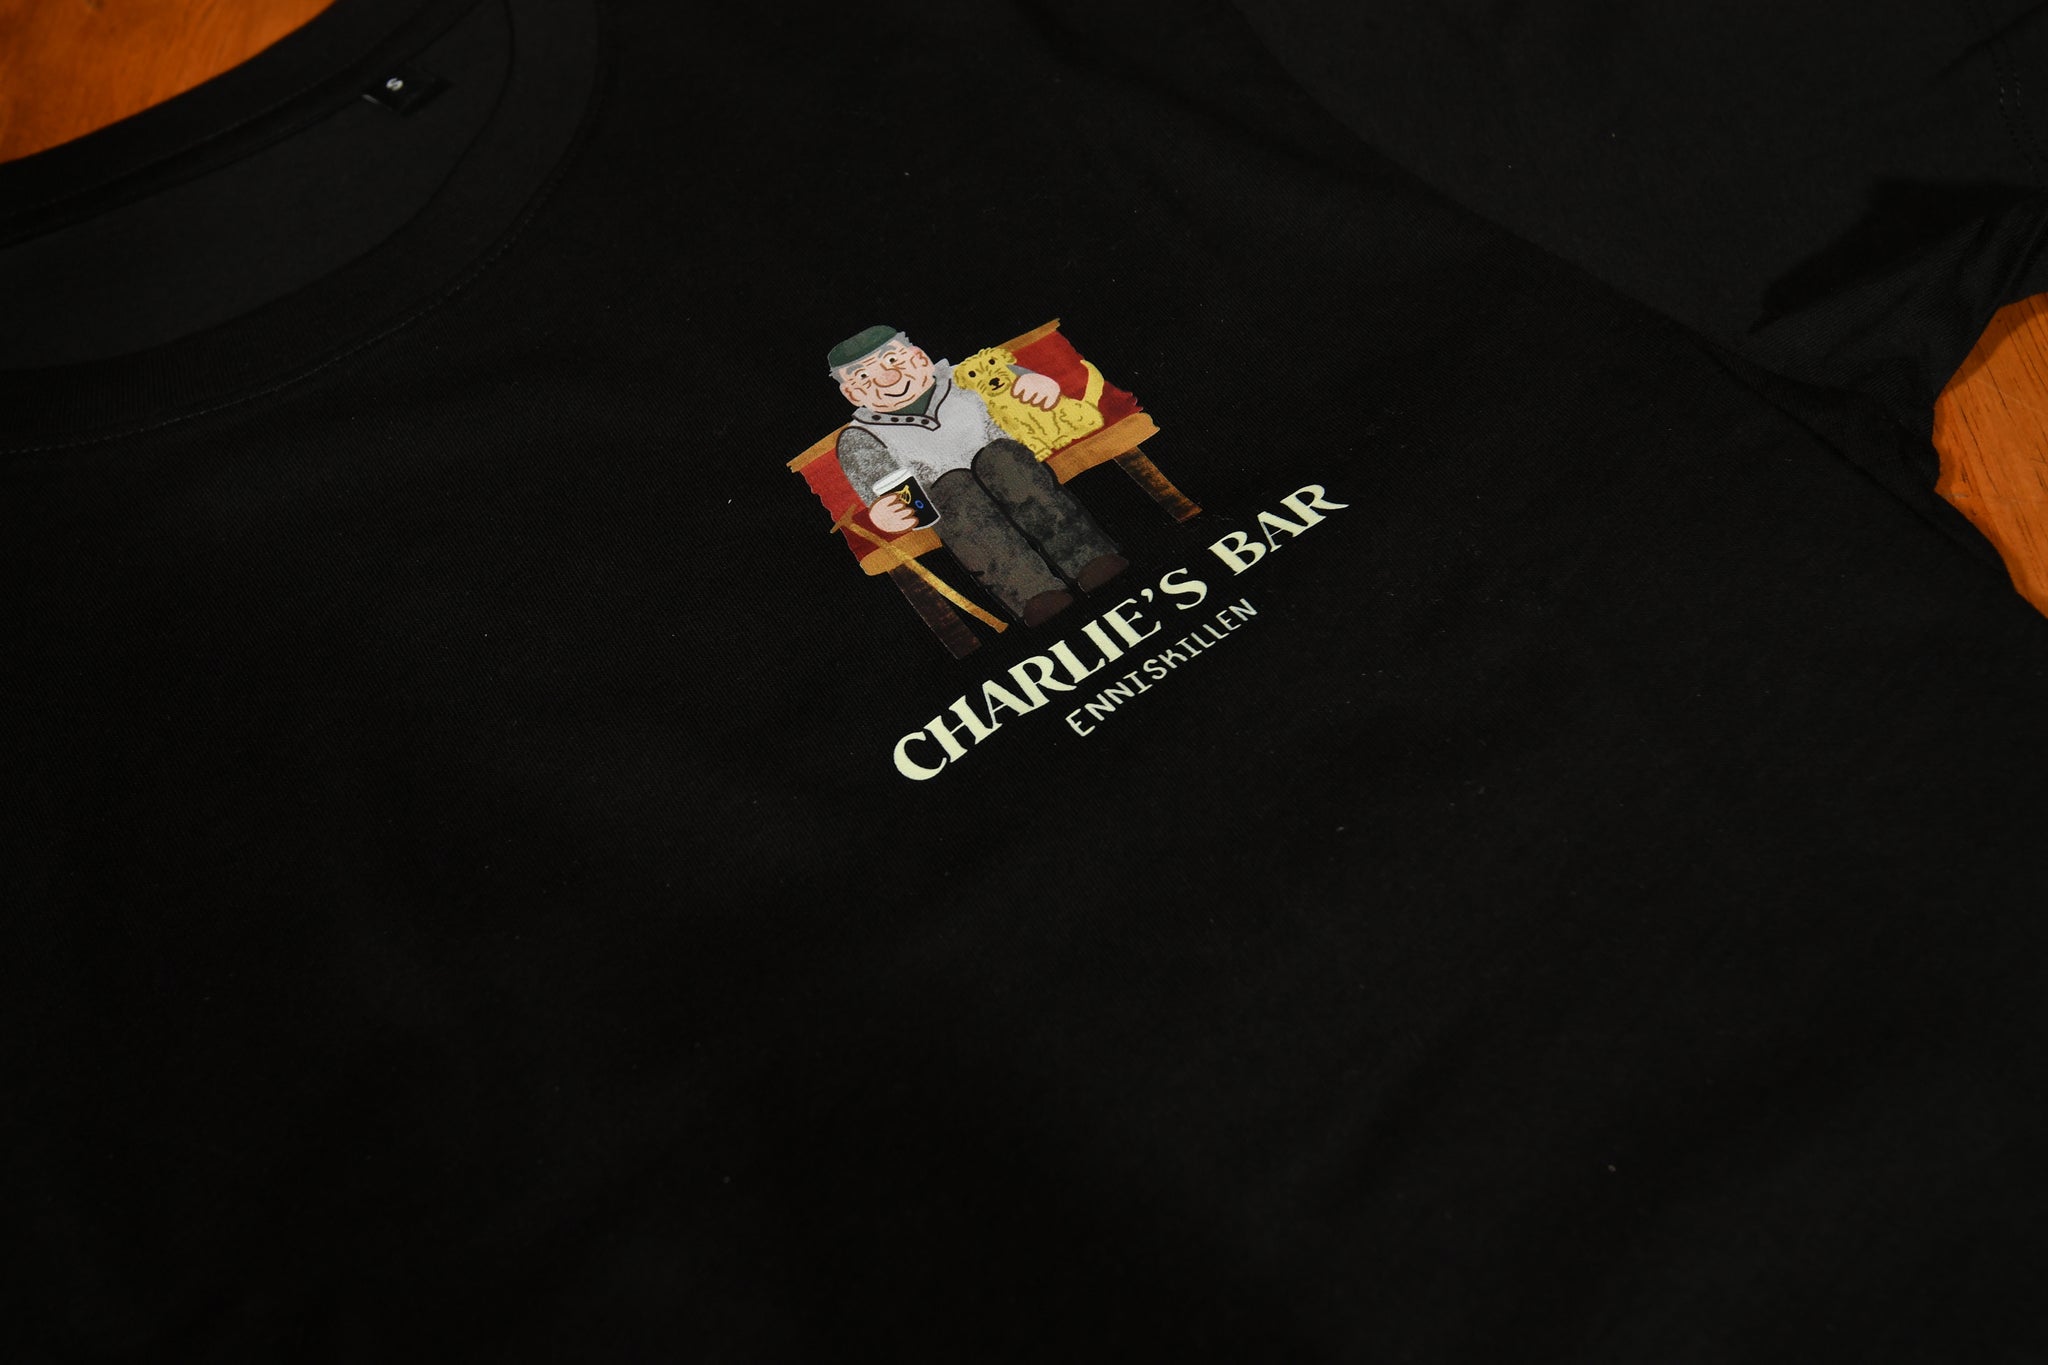 Charlies Bar x Ted & Stitch Charity Jumper (Limited Edition)